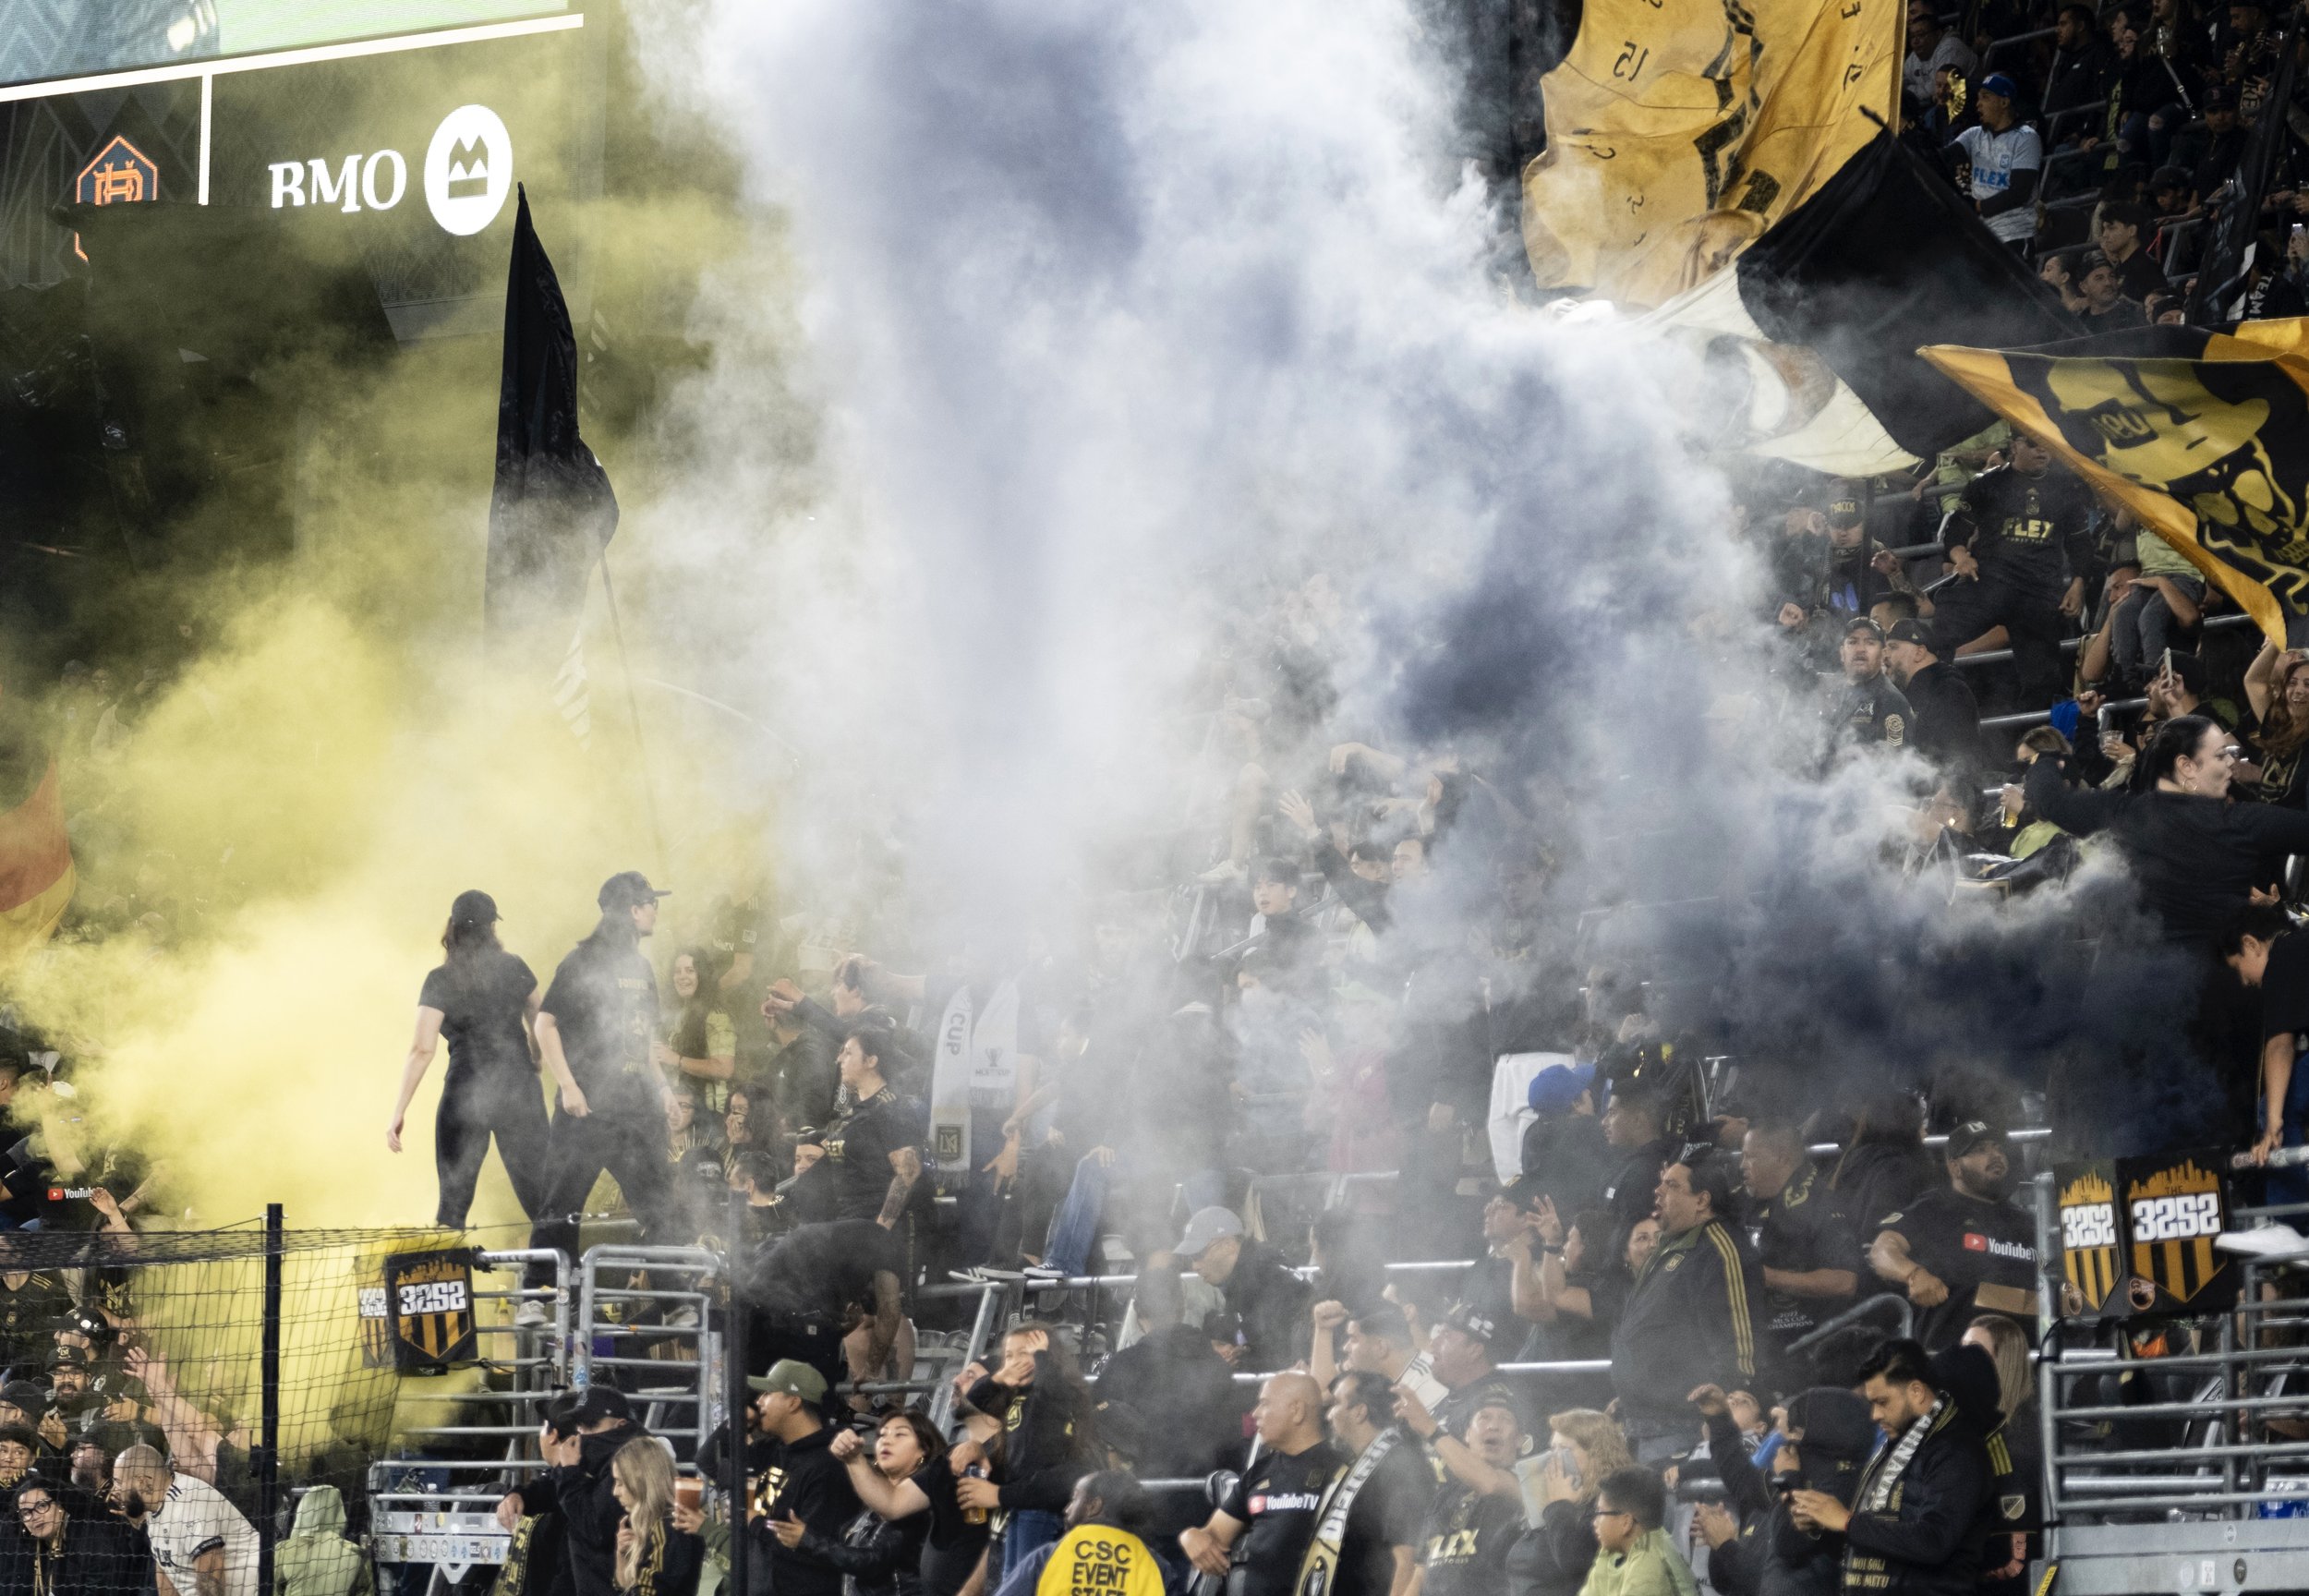  Smoke rises as Los Angeles Football Club (LAFC) supporters cheer on the team as they face off with Houston Dynamo FC in a Major League Soccer (MLS) match on Wednesday, June 14, at the Bank of Montreal (BMO) Stadium in Los Angeles, California. (Anna 